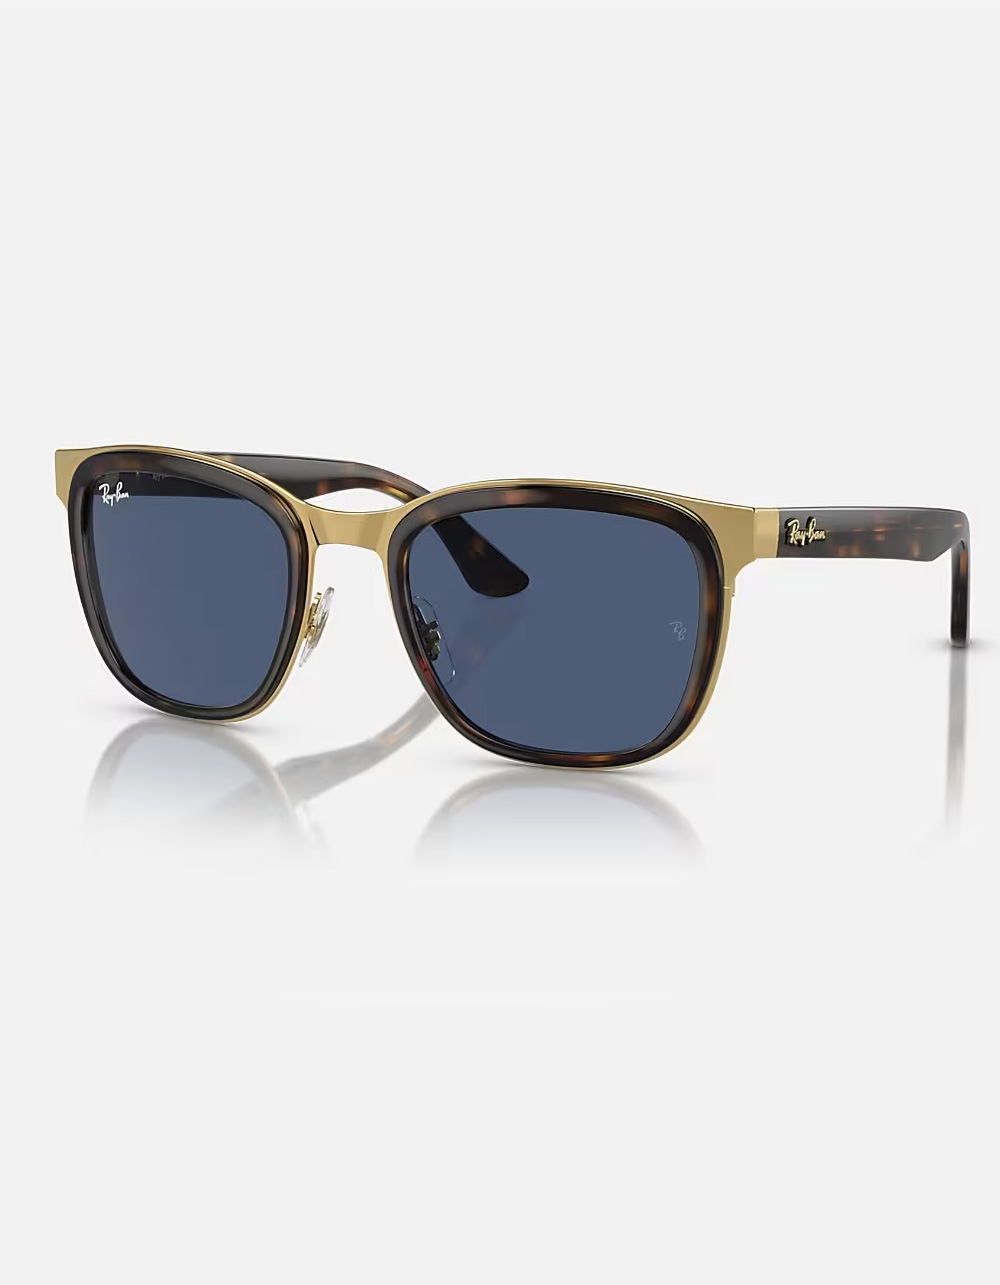 RAY-BAN Clyde Sunglasses